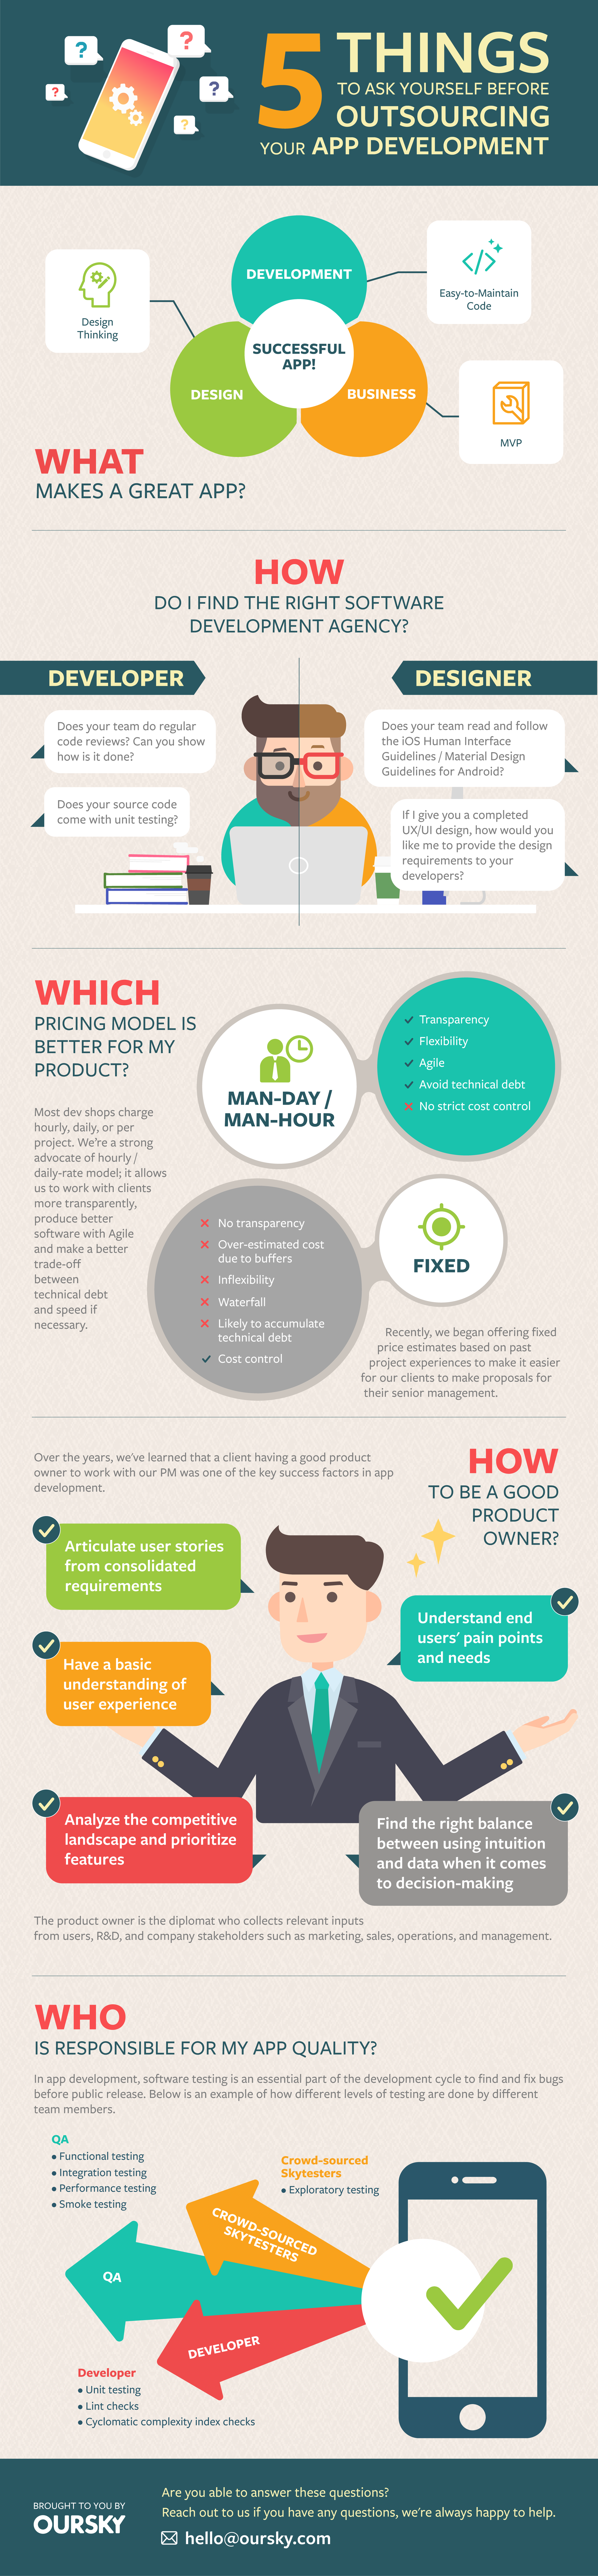 infographic outsourcing software development